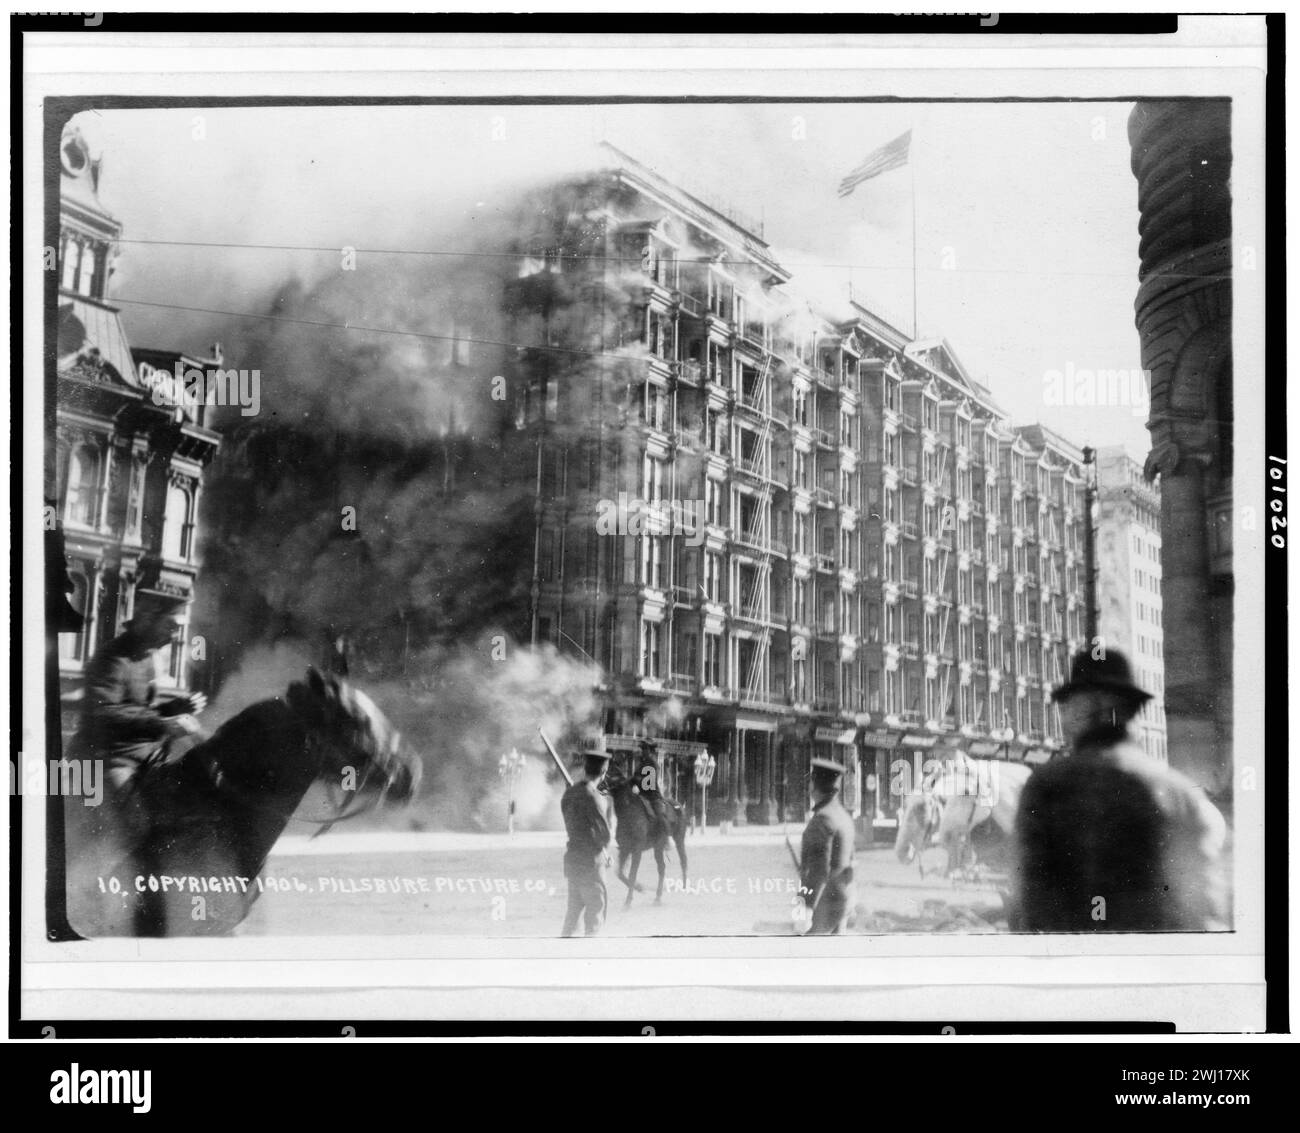 San Francisco 1906 Earthquake. Palace Hotel on fire, San Francisco, California, during earthquake and fire of April 18, 1906 Stock Photo